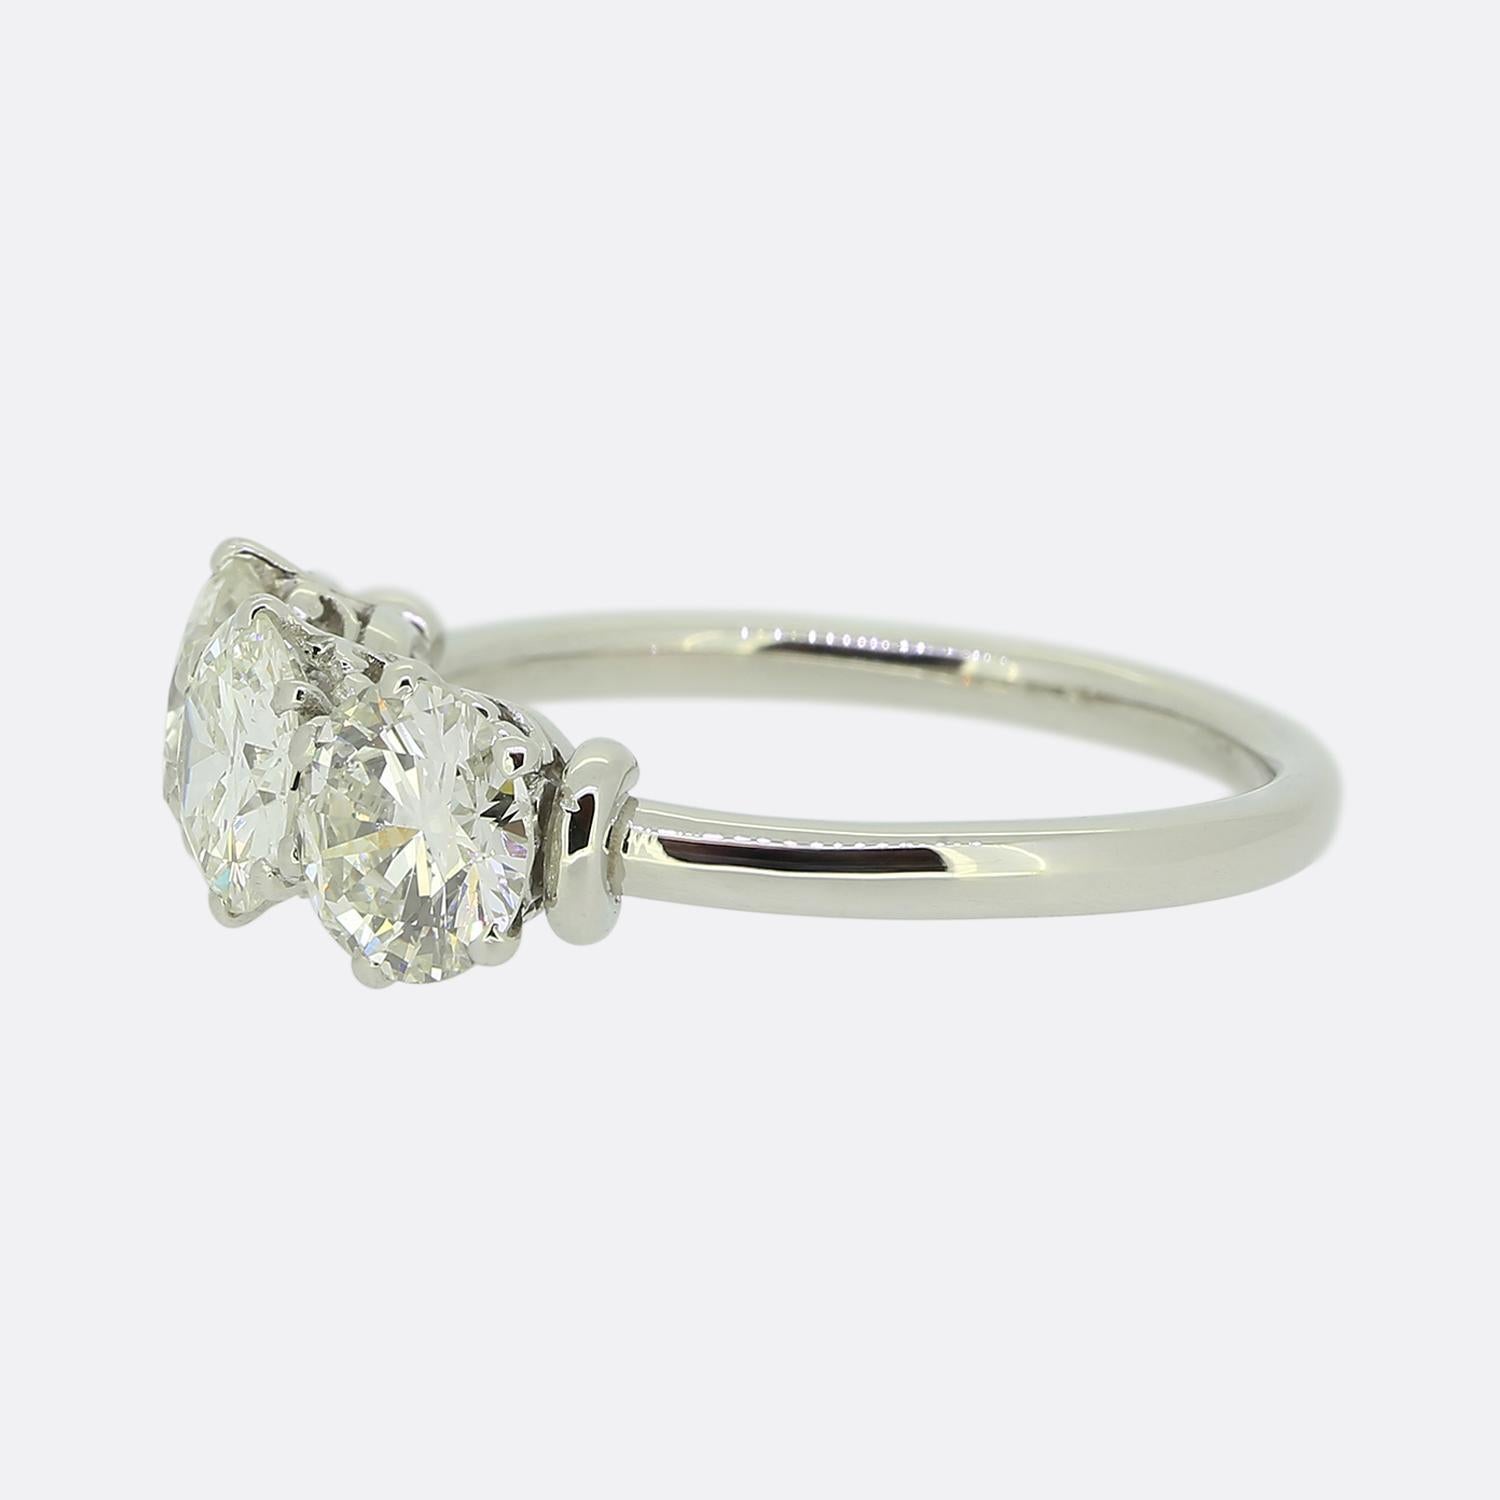 Here we have a wonderful three-stone diamond ring. This vintage piece has been crafted from platinum and features a trio of excellently matched round faceted transitional cut diamonds; all of which have been individually claw set in a collective